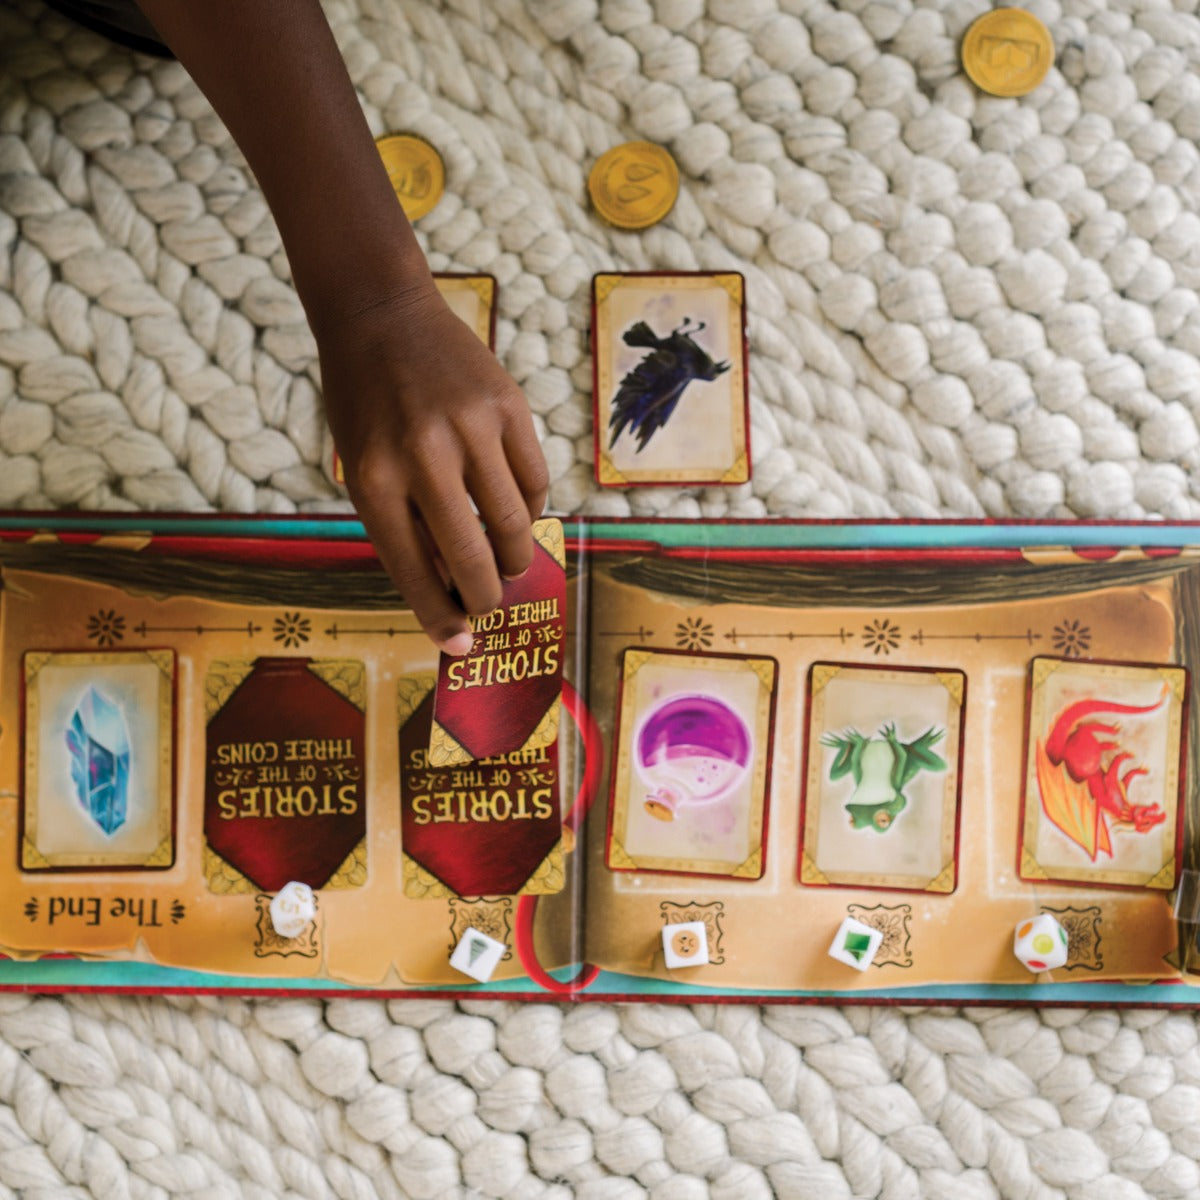 Stories of The Three Coins - A Peaceable Kingdom Cooperative Game